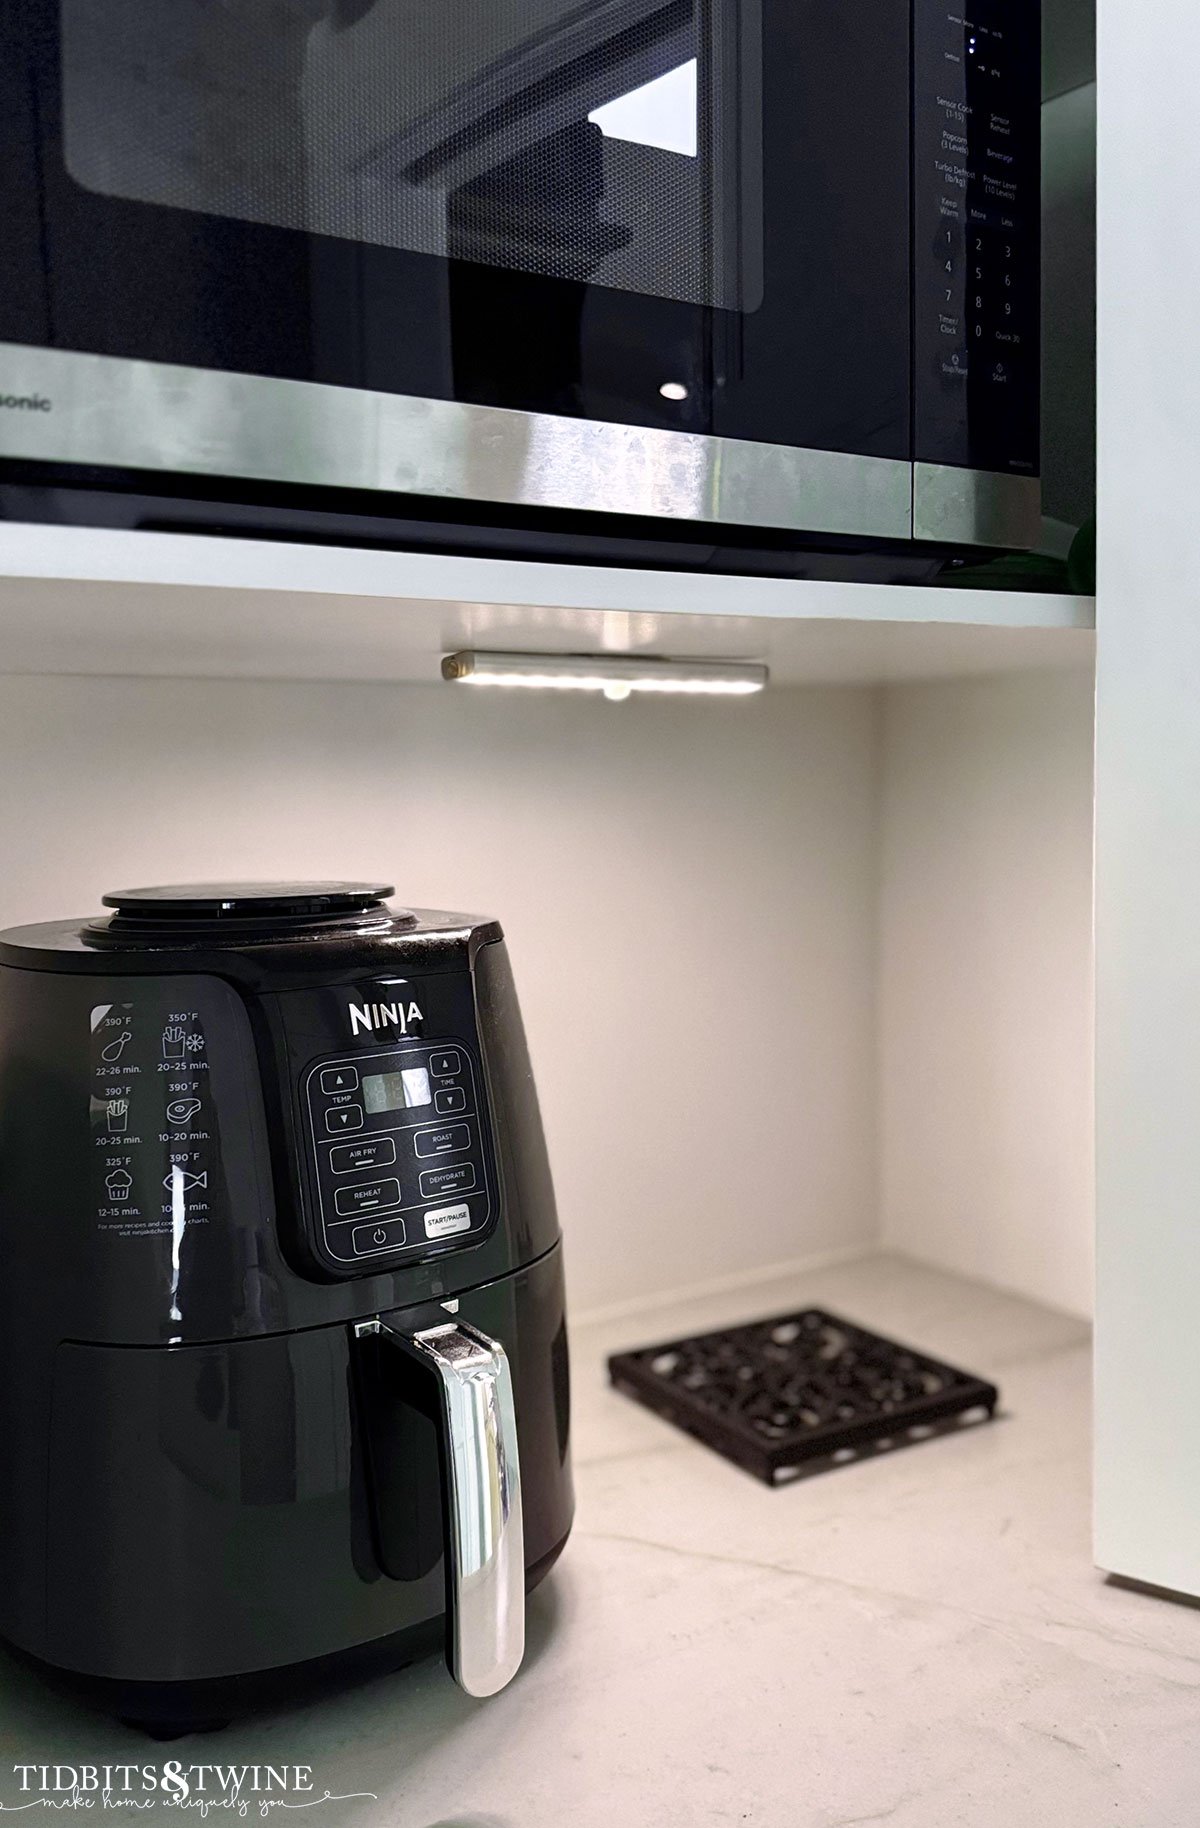 black ninja air fryer in kitchen cabinet with light and microwave above